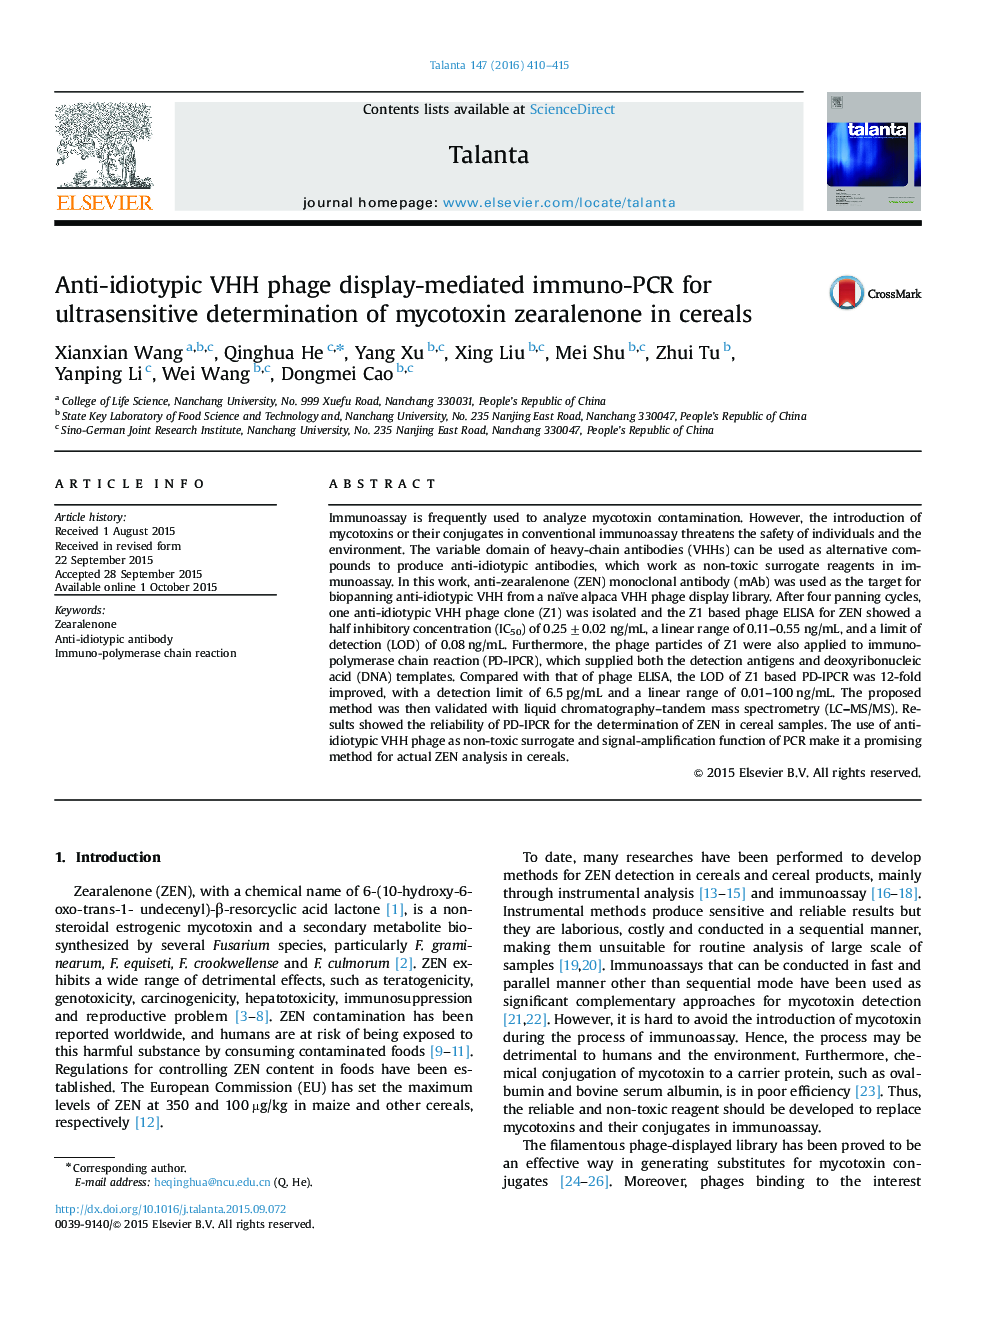 Anti-idiotypic VHH phage display-mediated immuno-PCR for ultrasensitive determination of mycotoxin zearalenone in cereals